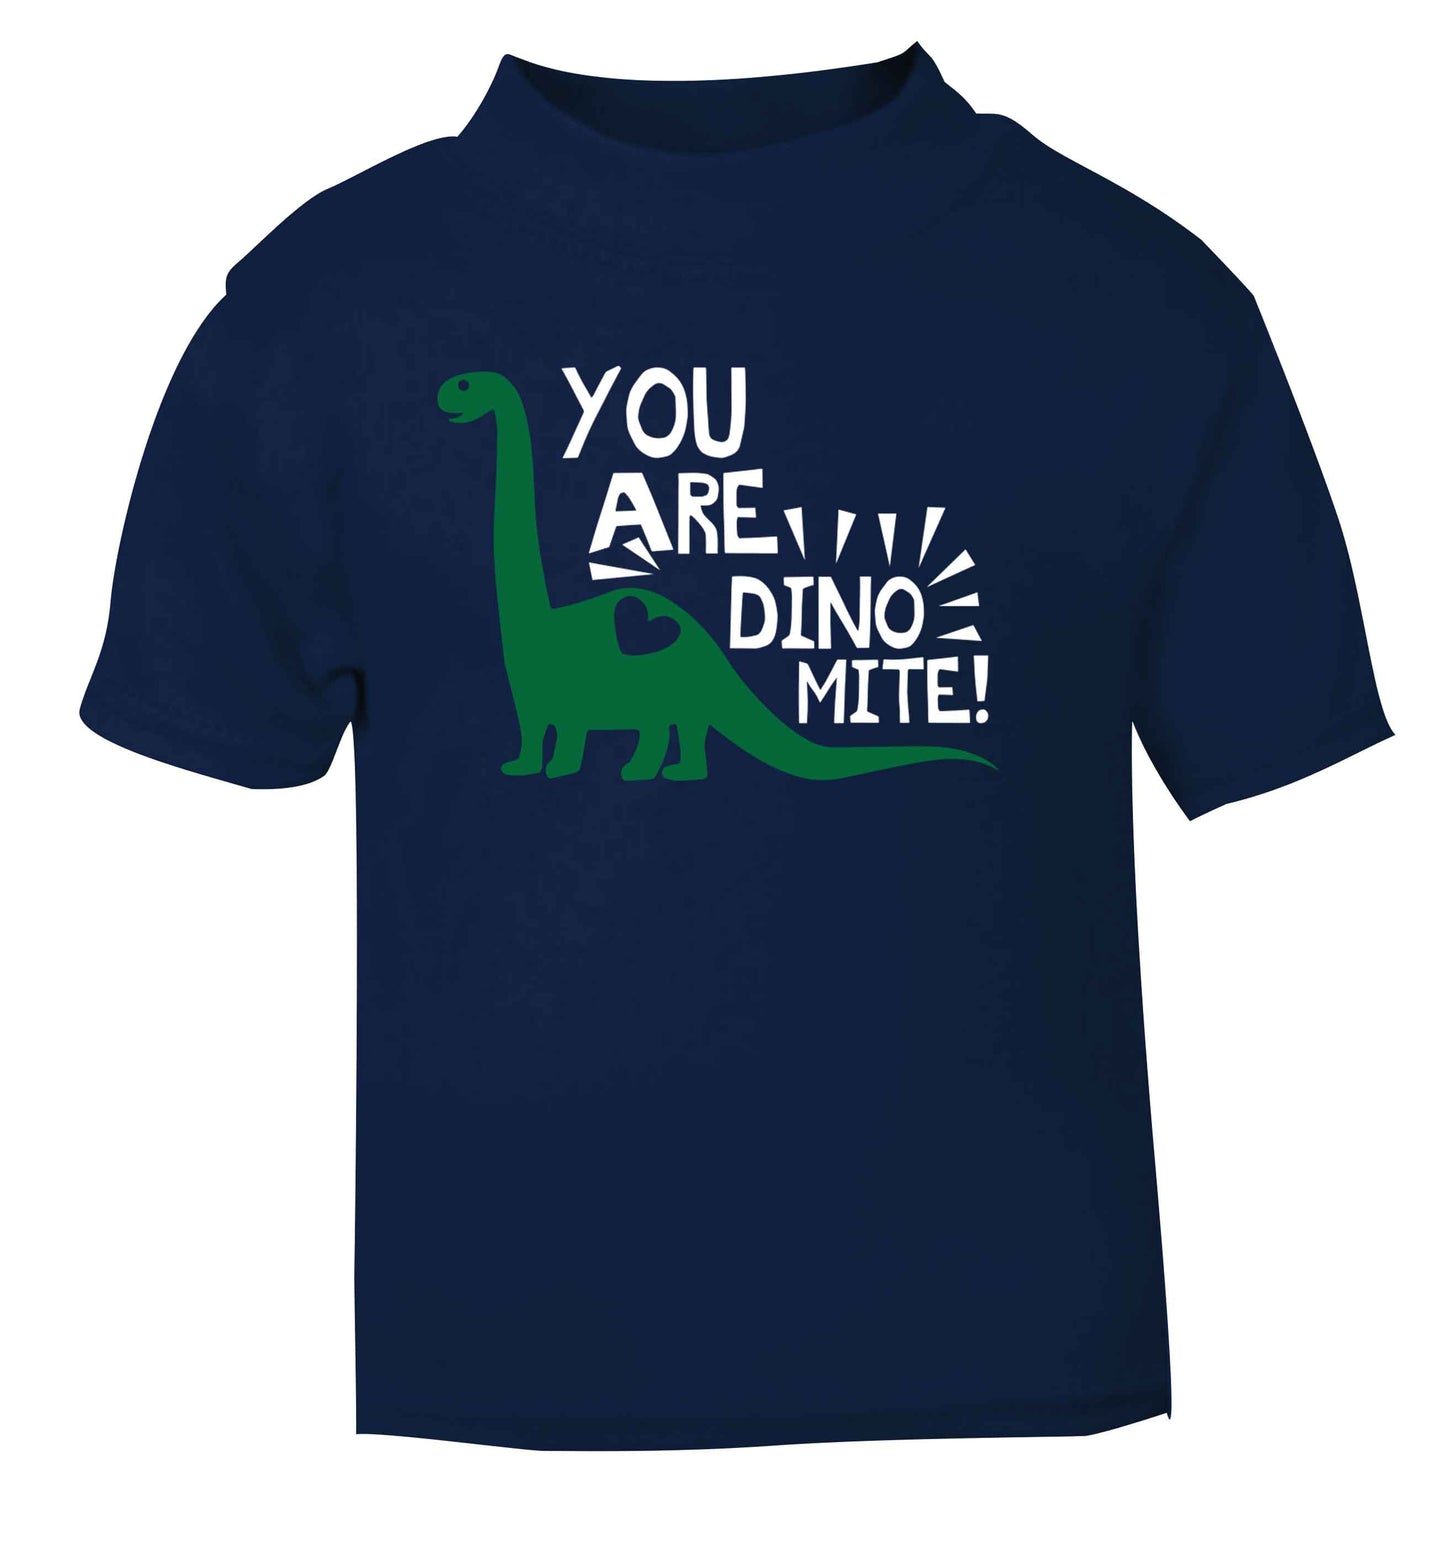 You are dinomite! navy Baby Toddler Tshirt 2 Years